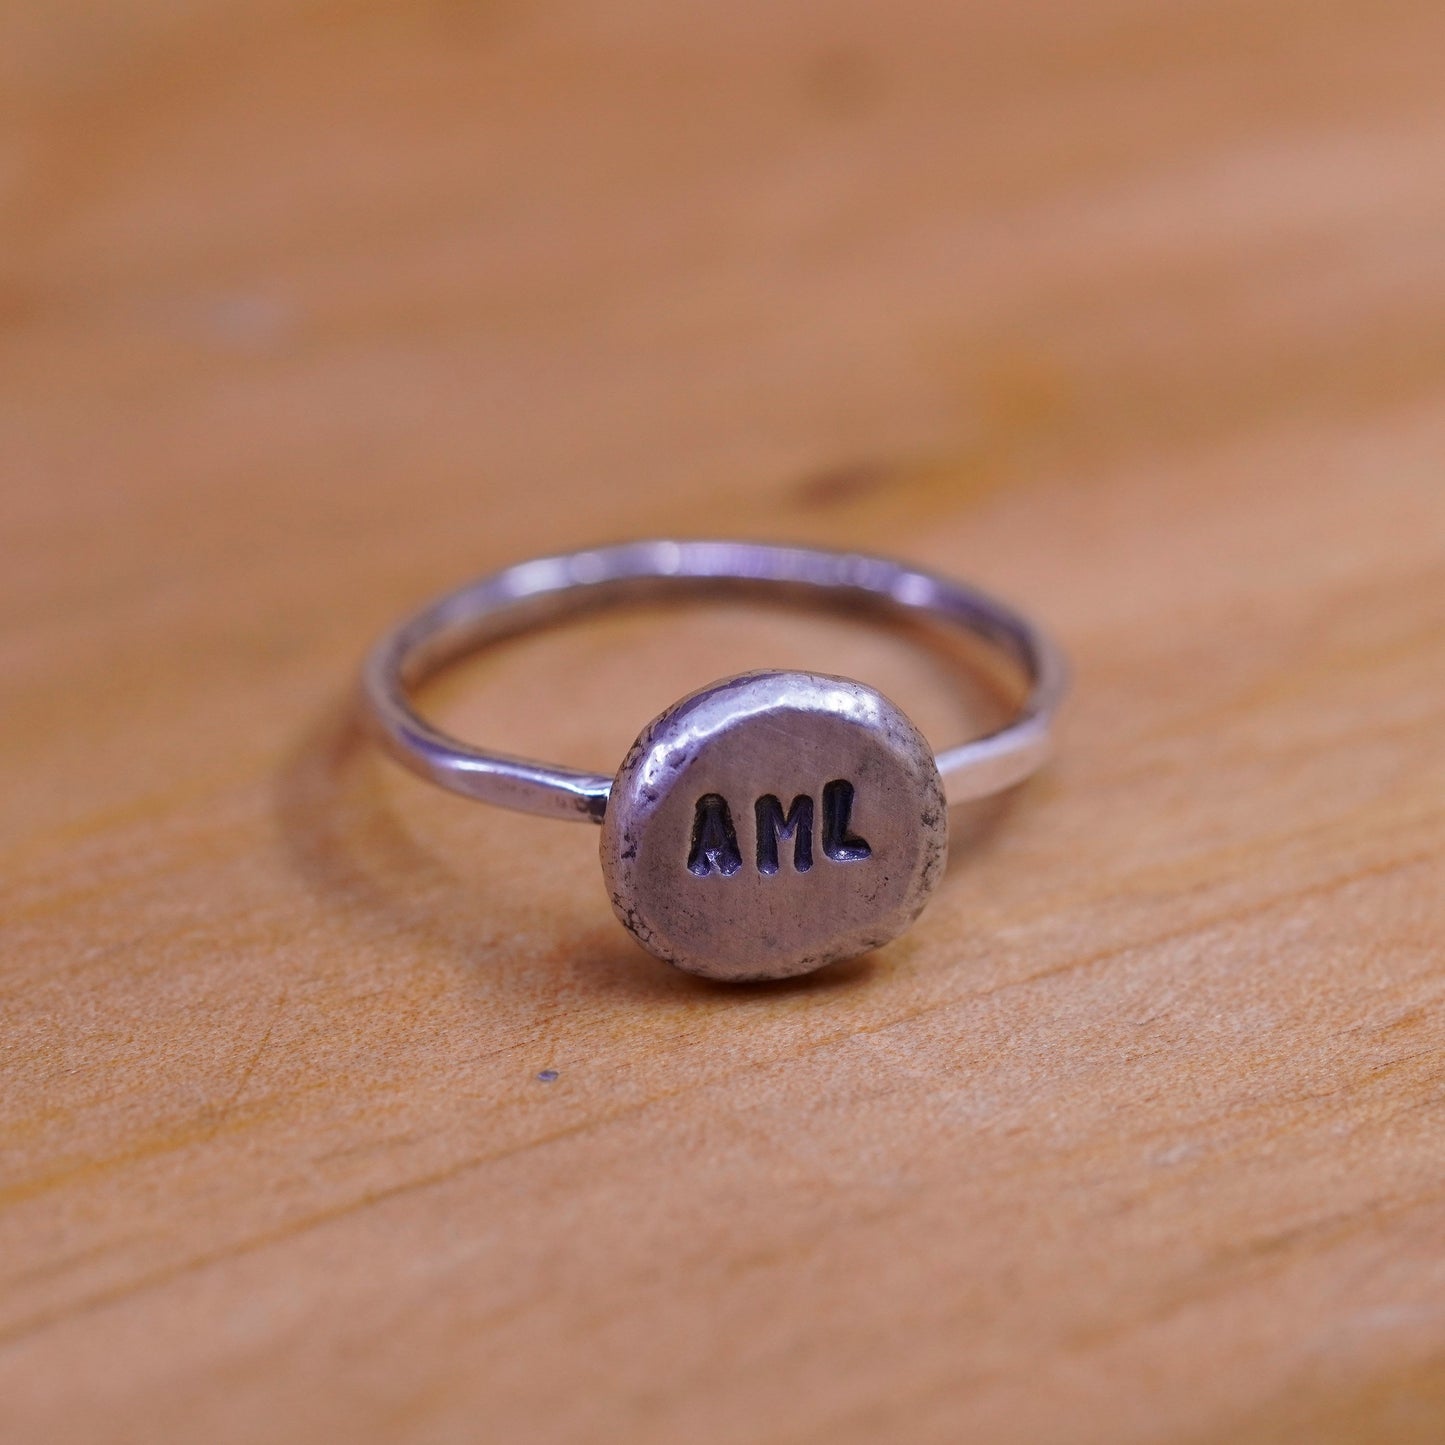 Size 4.75, vintage Sterling silver ring, 925 initial letter “AML” band